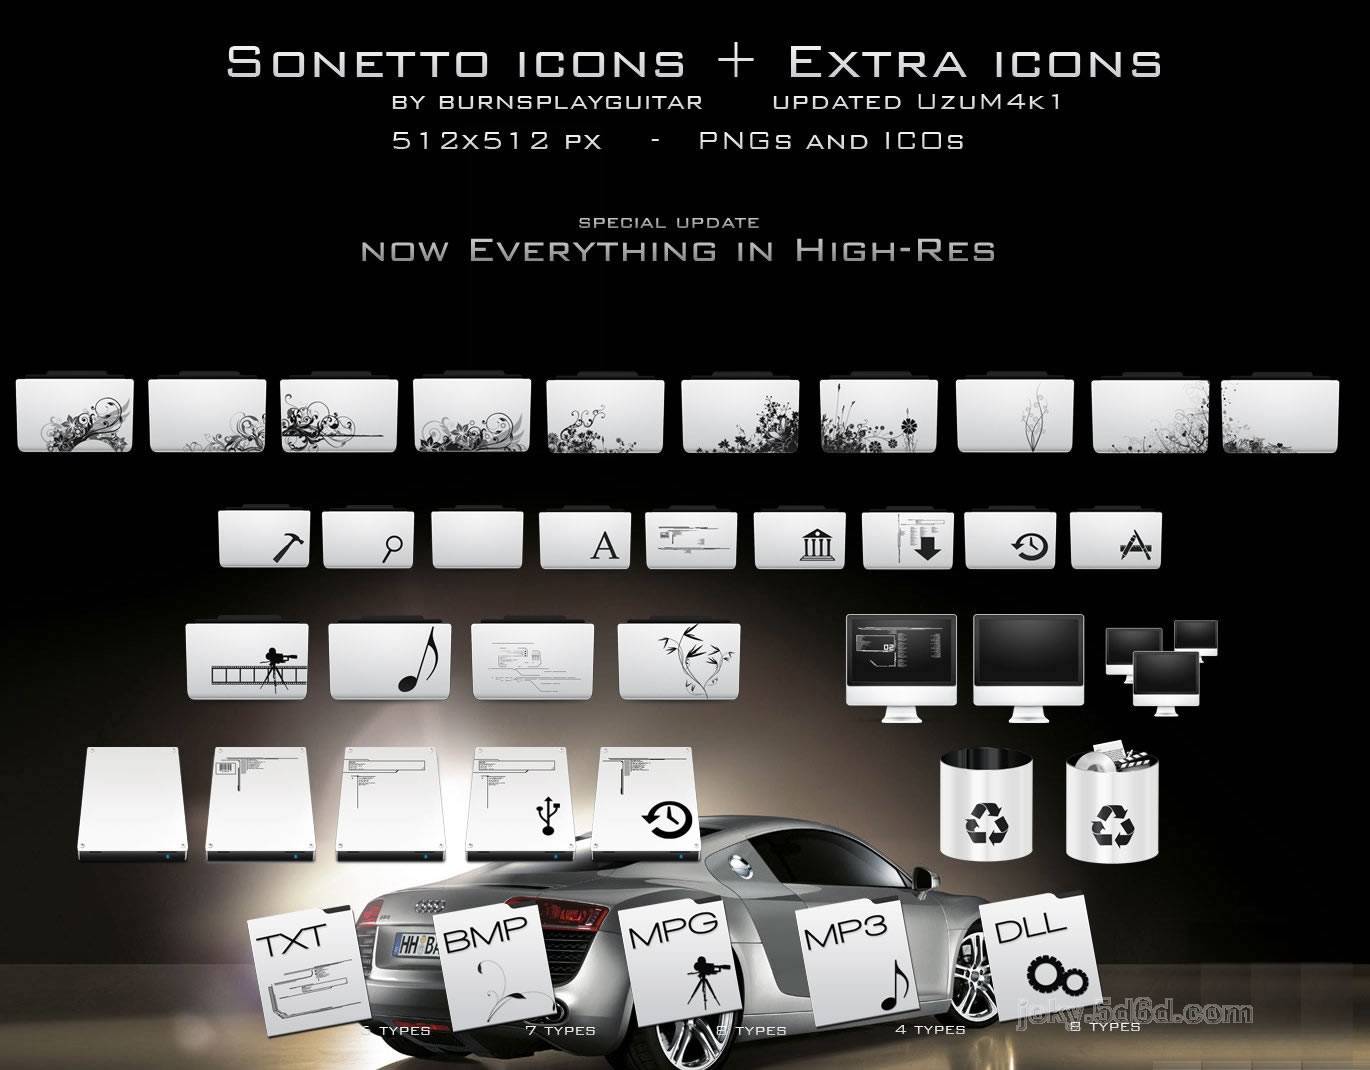 Sonetto_Icons_and_Extras_by_burnsplayguitar.jpg